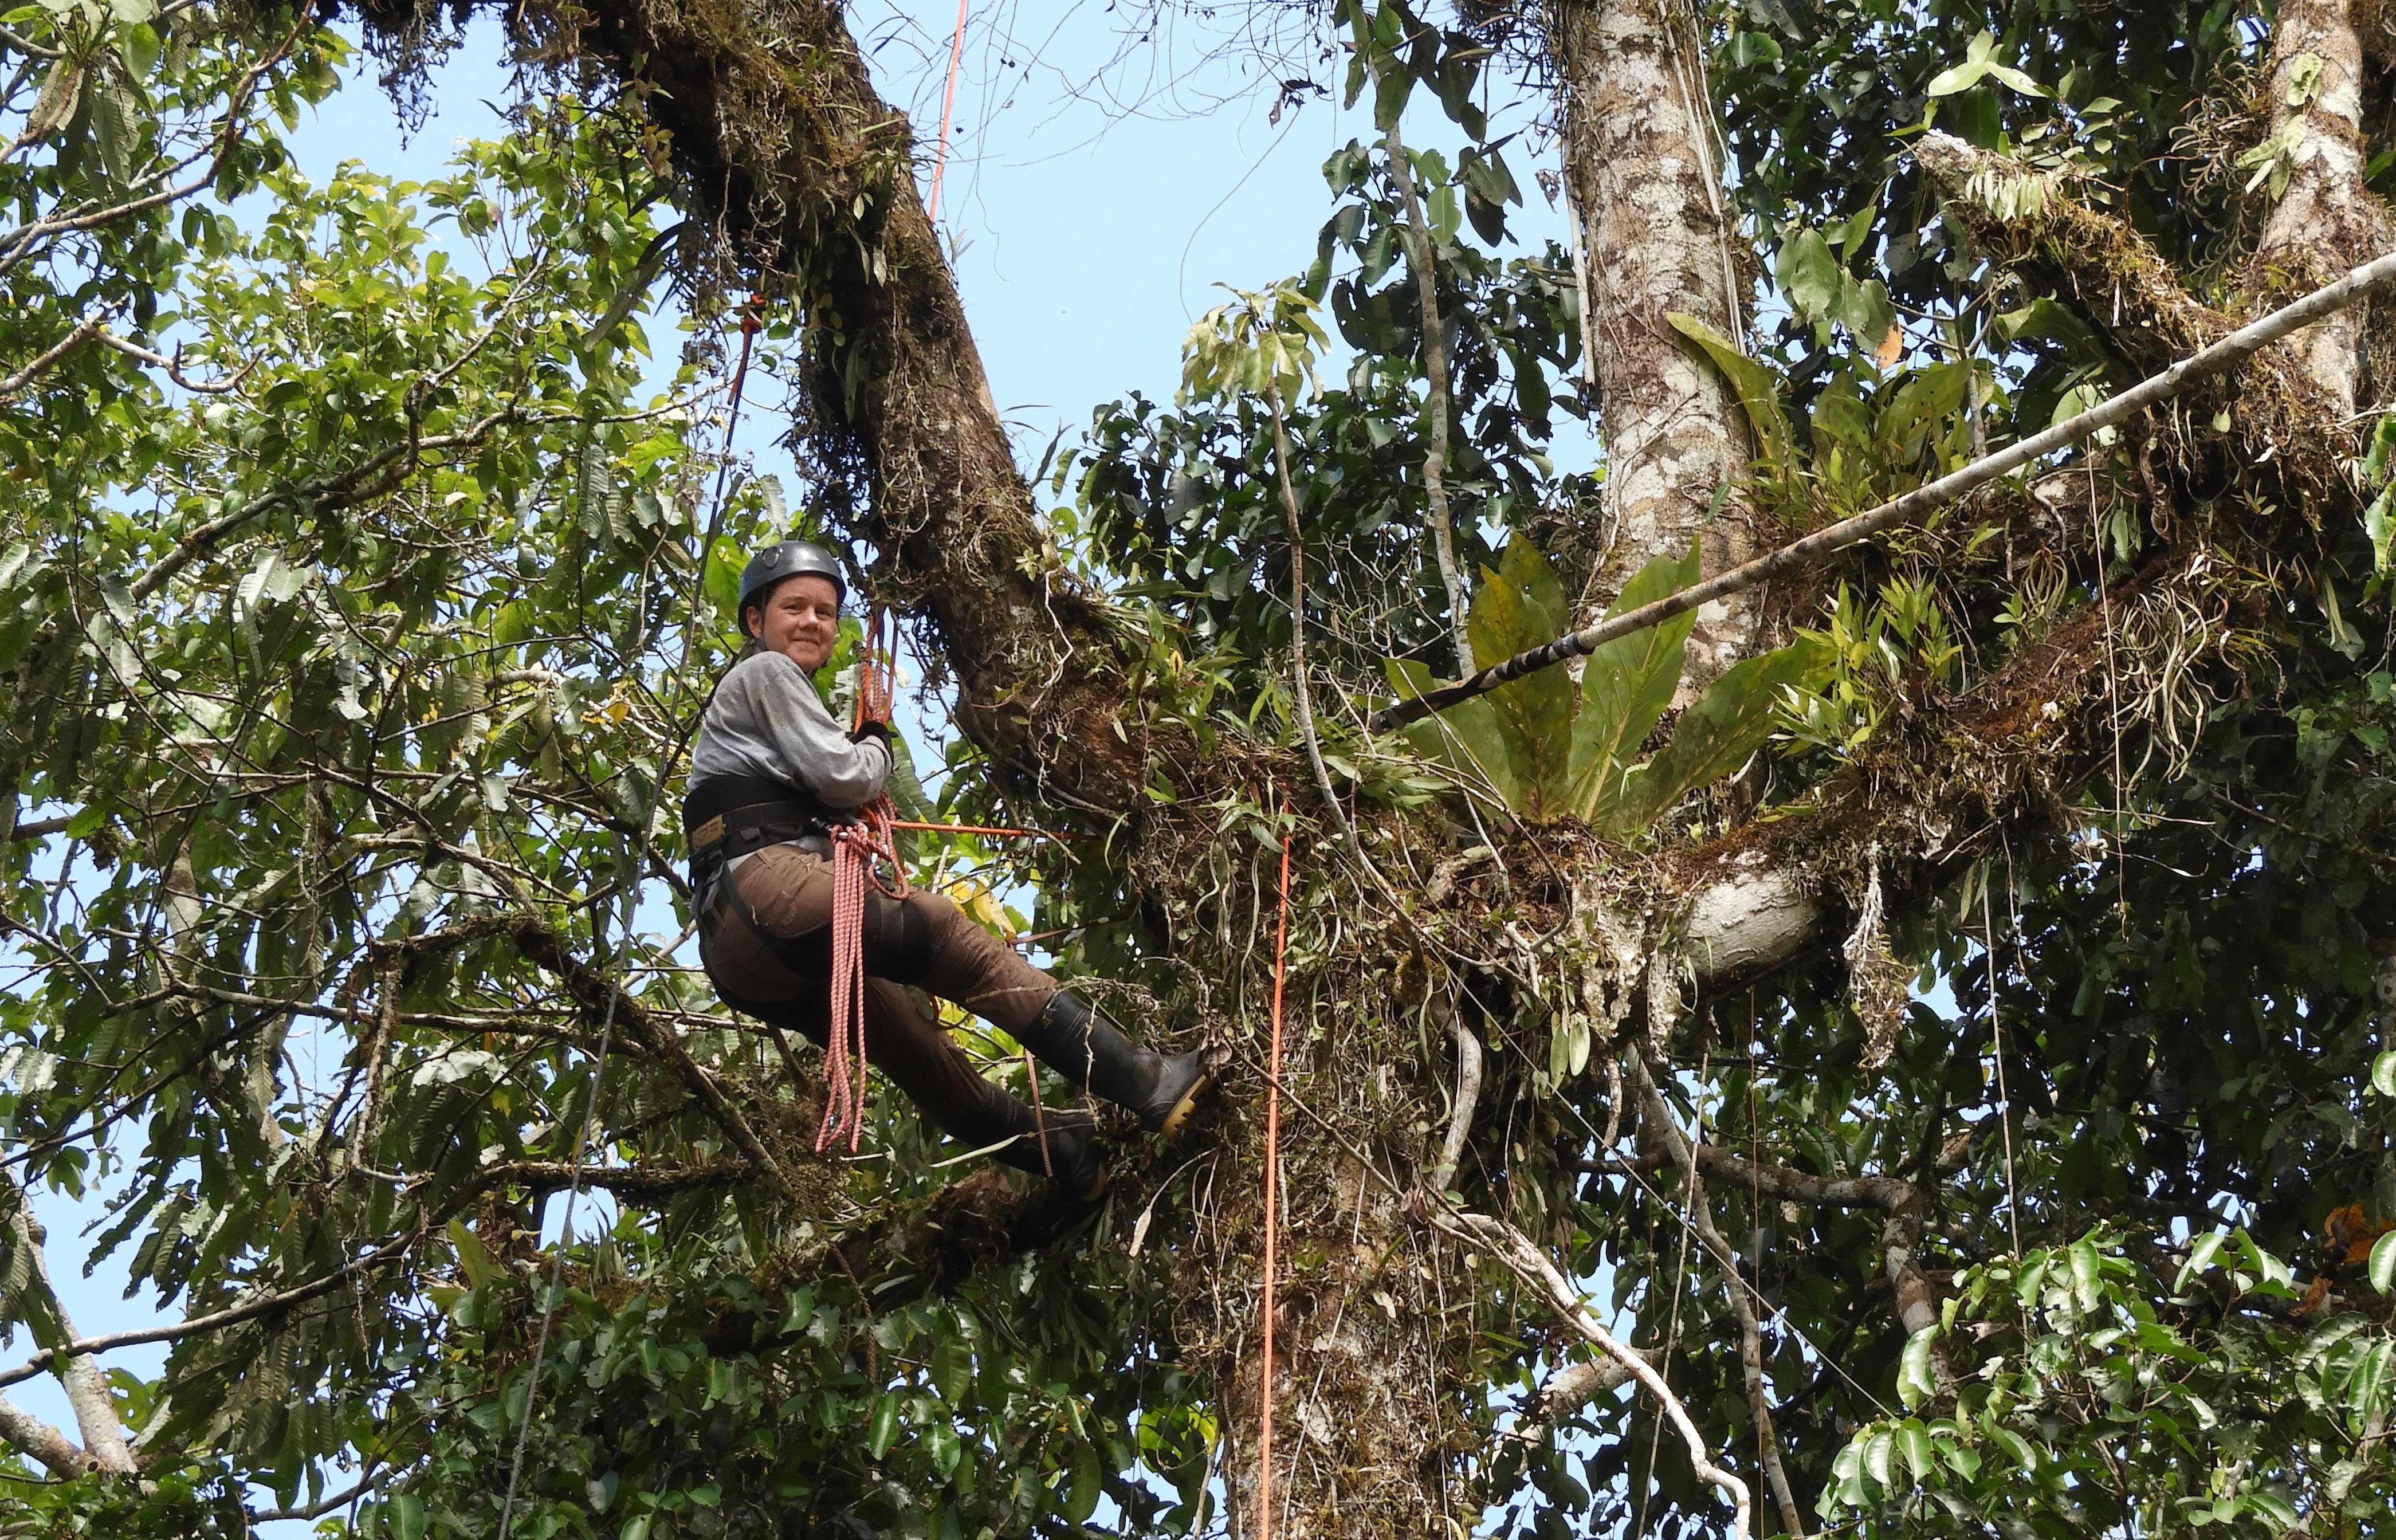 Conservation biologist Tremaine Gregory climbs a large tree in Peru's tropical rainforest using a rope and other climbing gear. The tree is covered with green leaves and epiphytes.